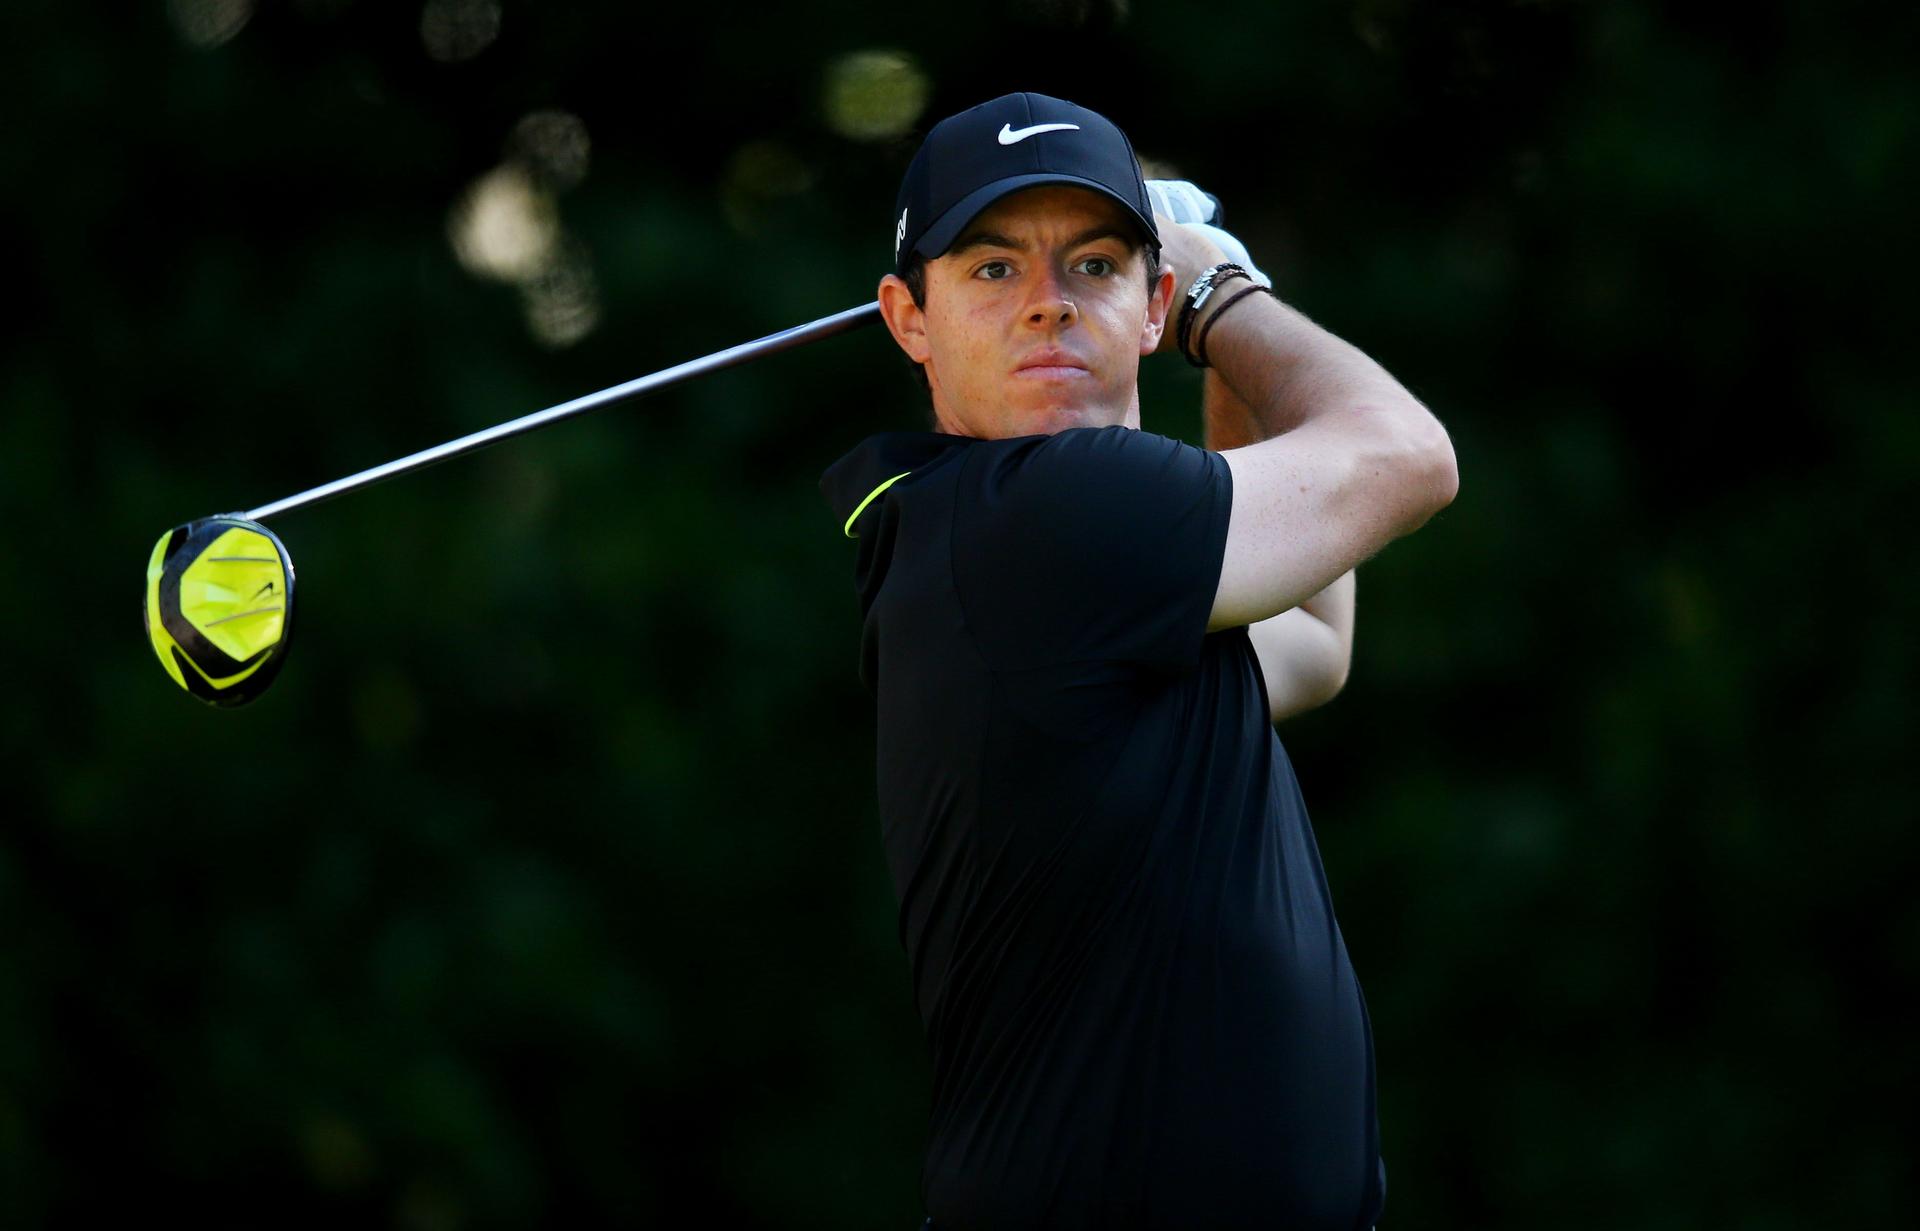 World No 1 golfer Rory McIlroy could be tempted to return for the Hong Kong Open. Photo: AFP